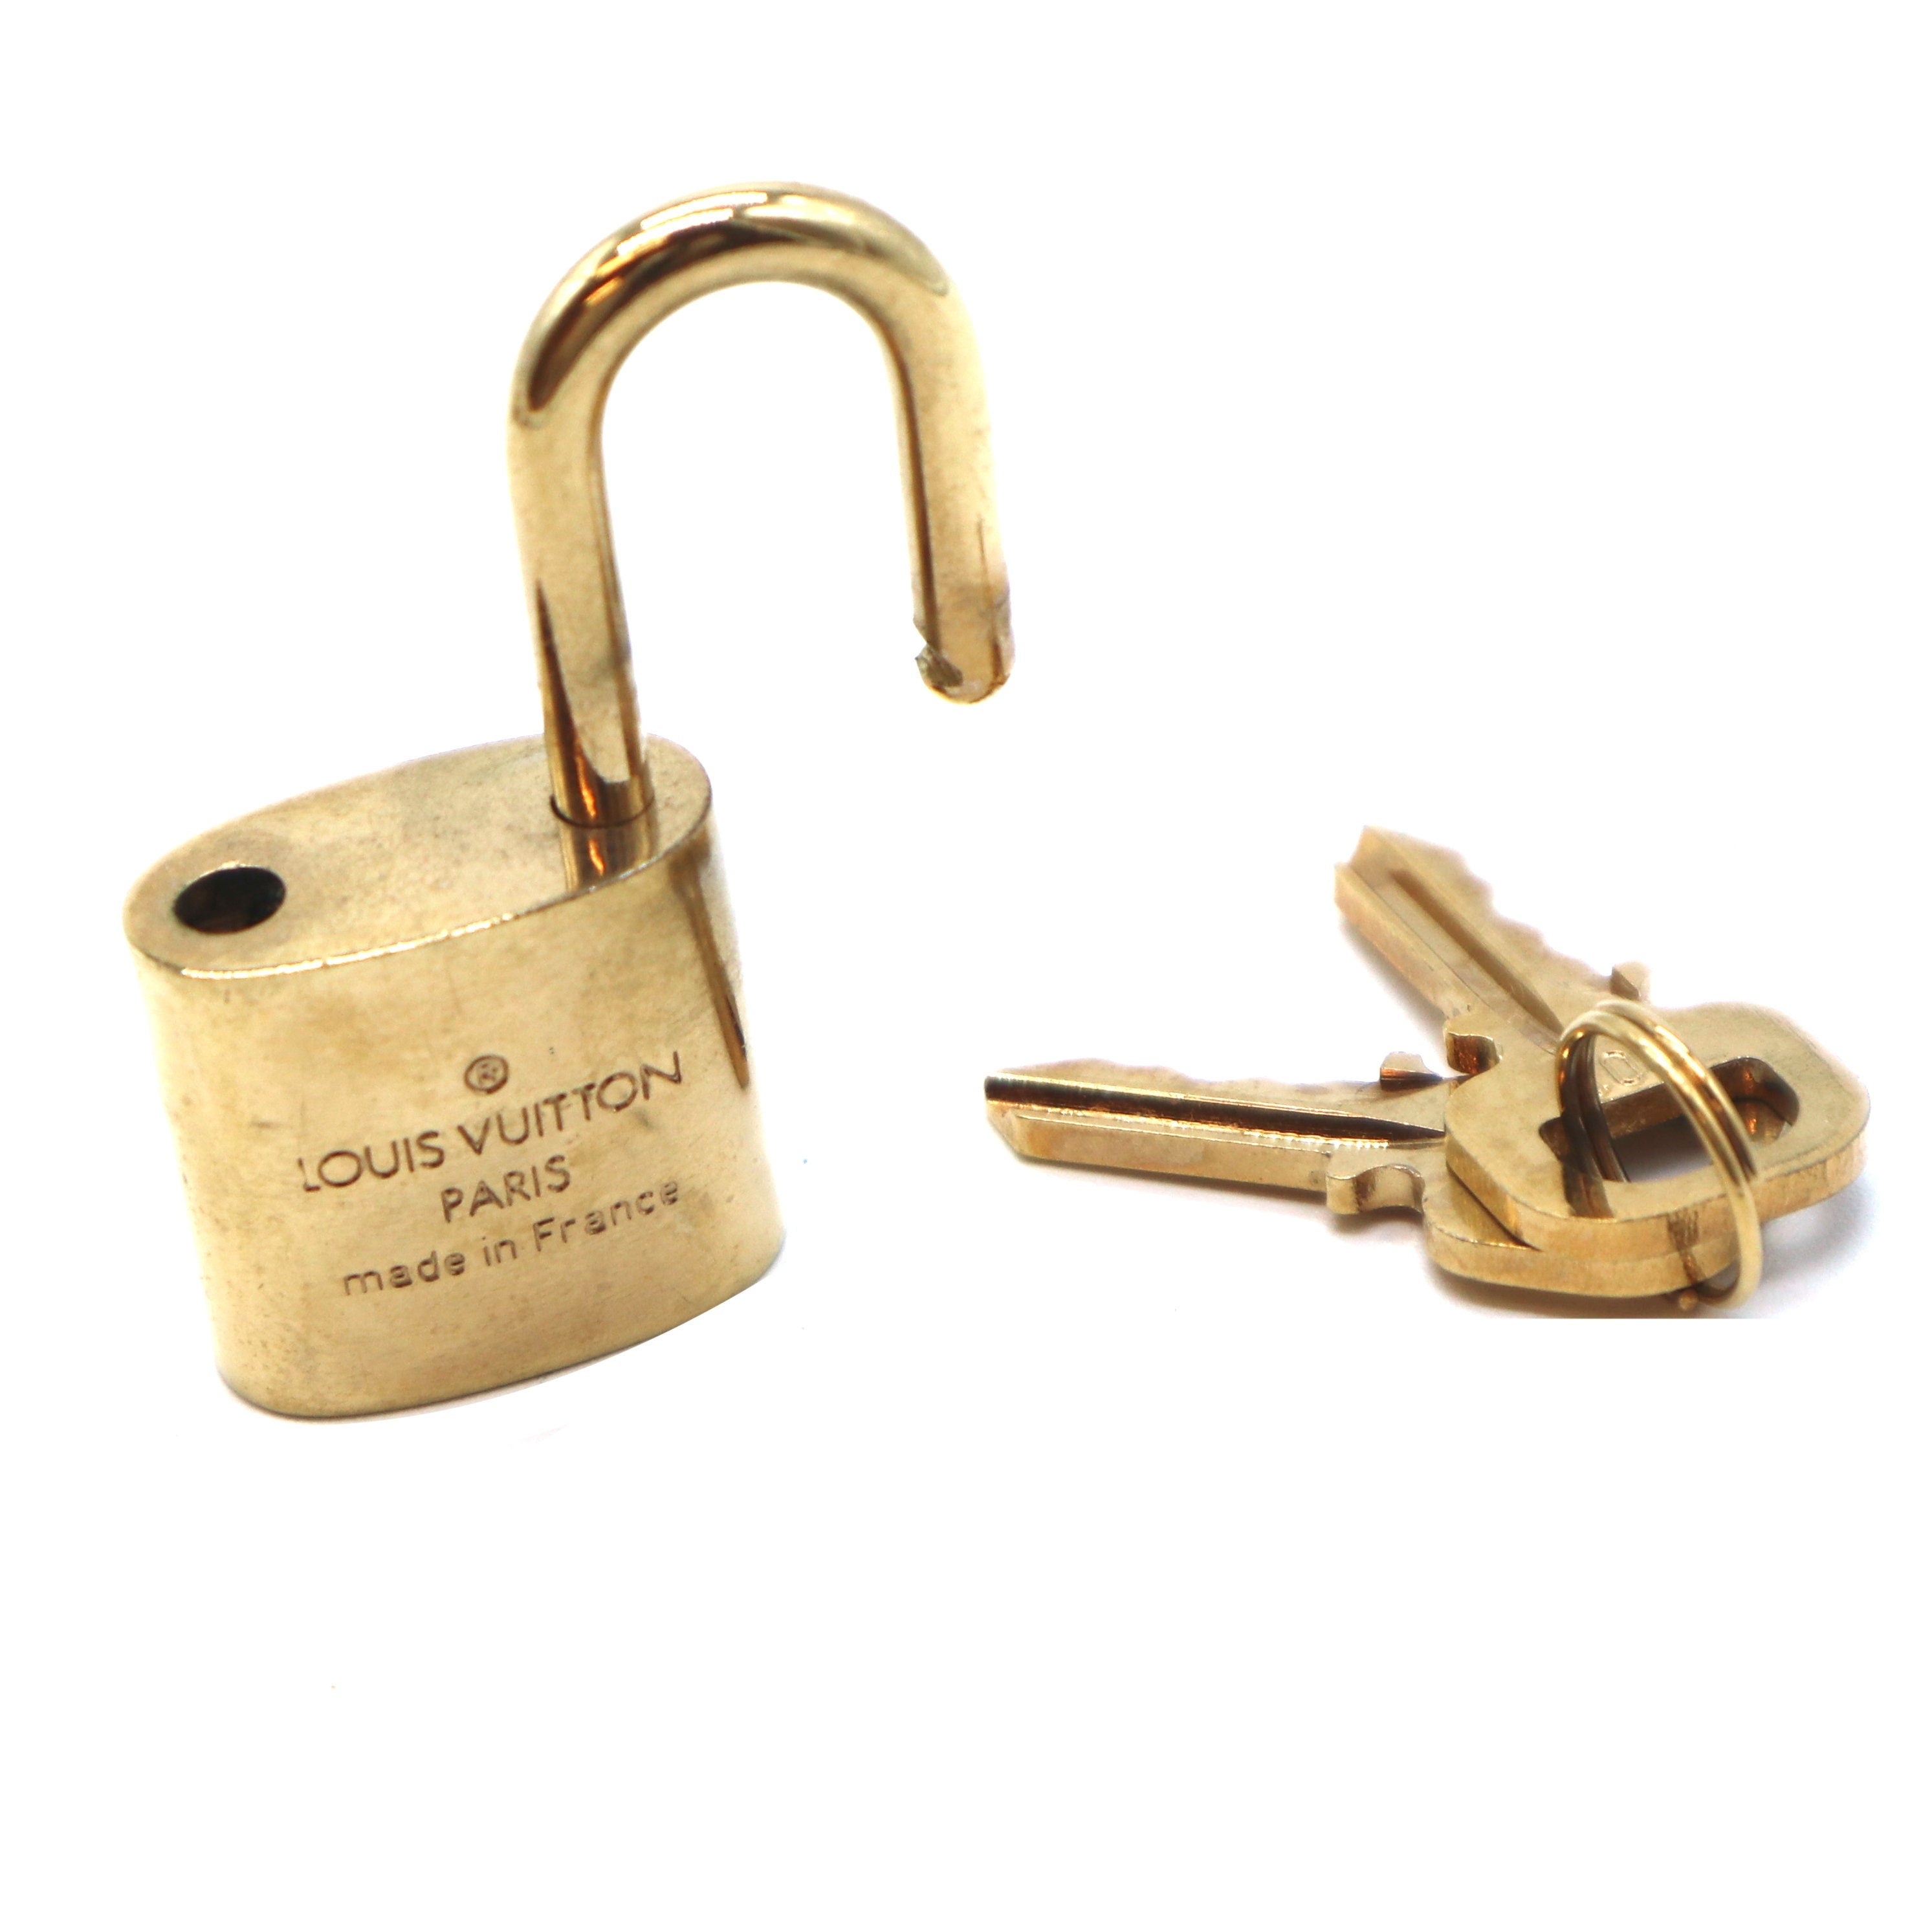 Authentic LOUIS VUITTON Lock And Key Set Padlock Made In France